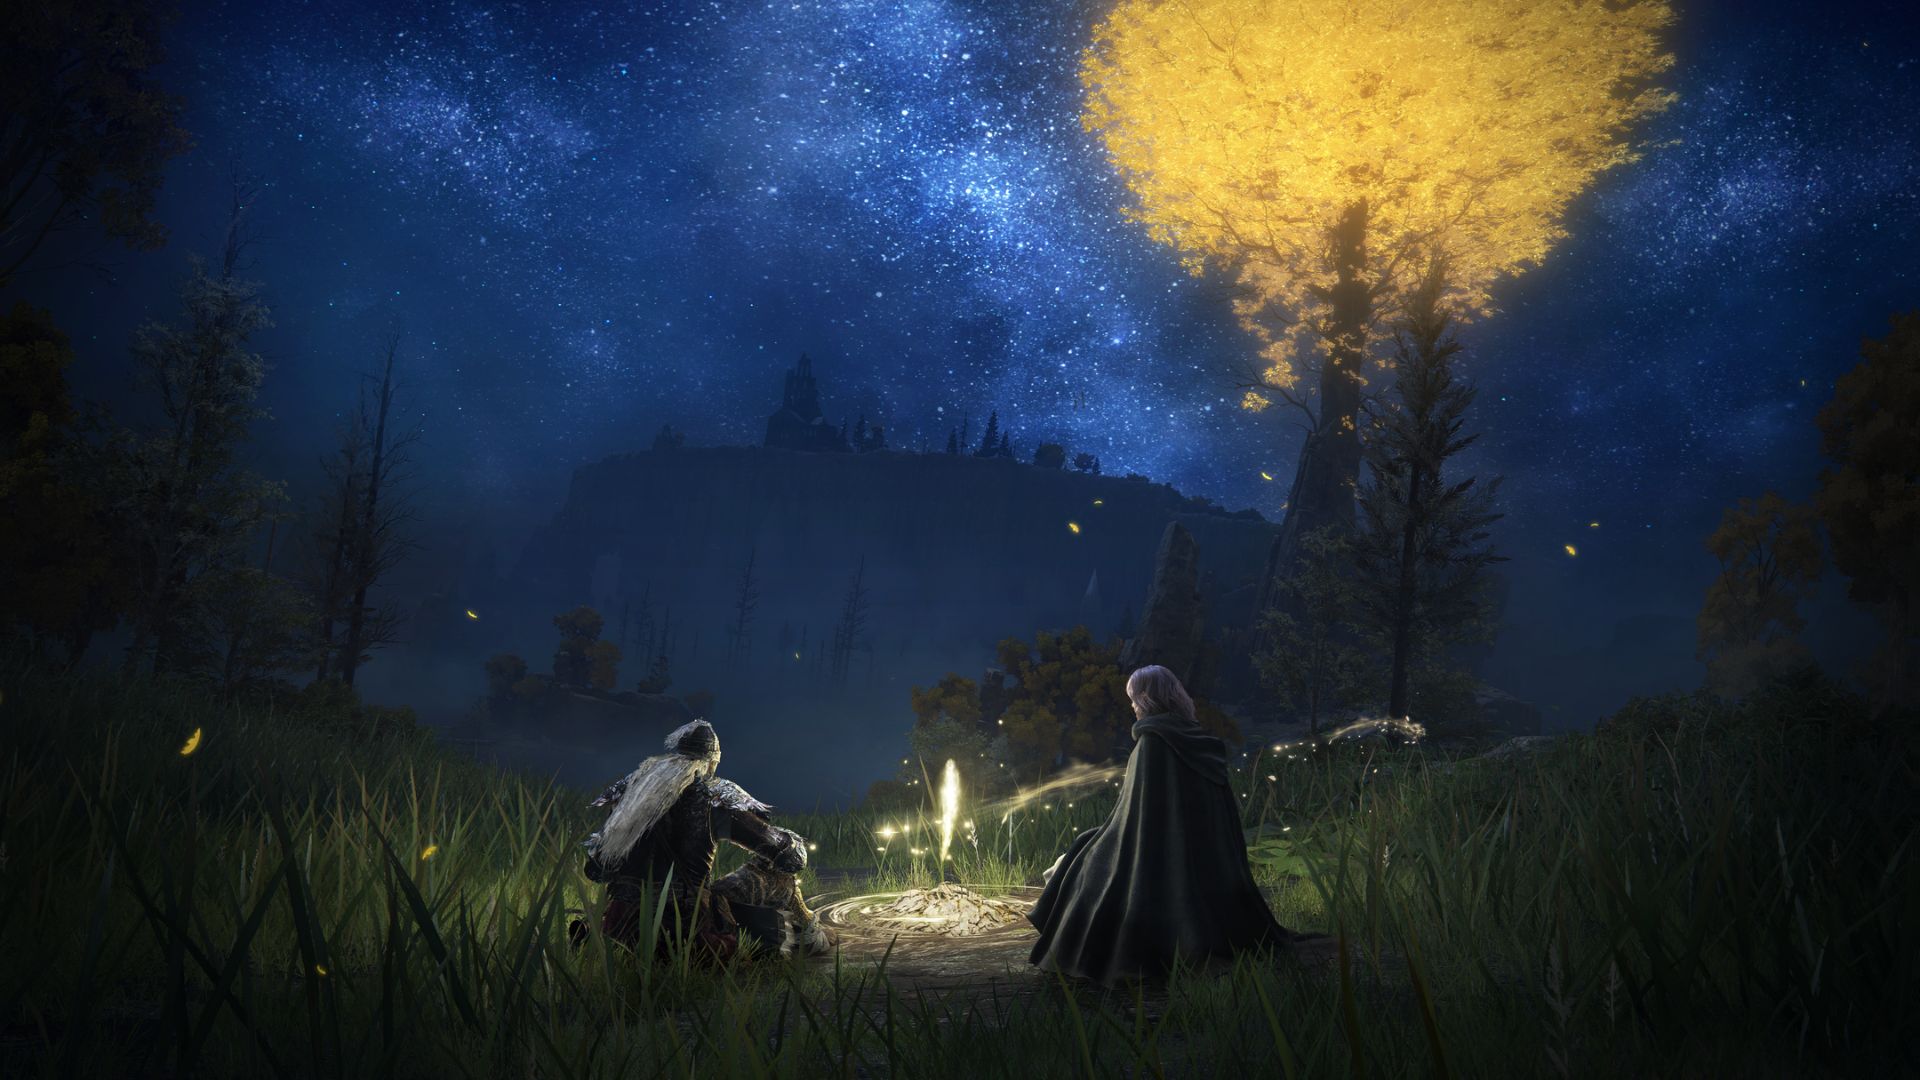 Elden Ring screenshot of Melina and the Tarnished sitting next to a site of grace at night